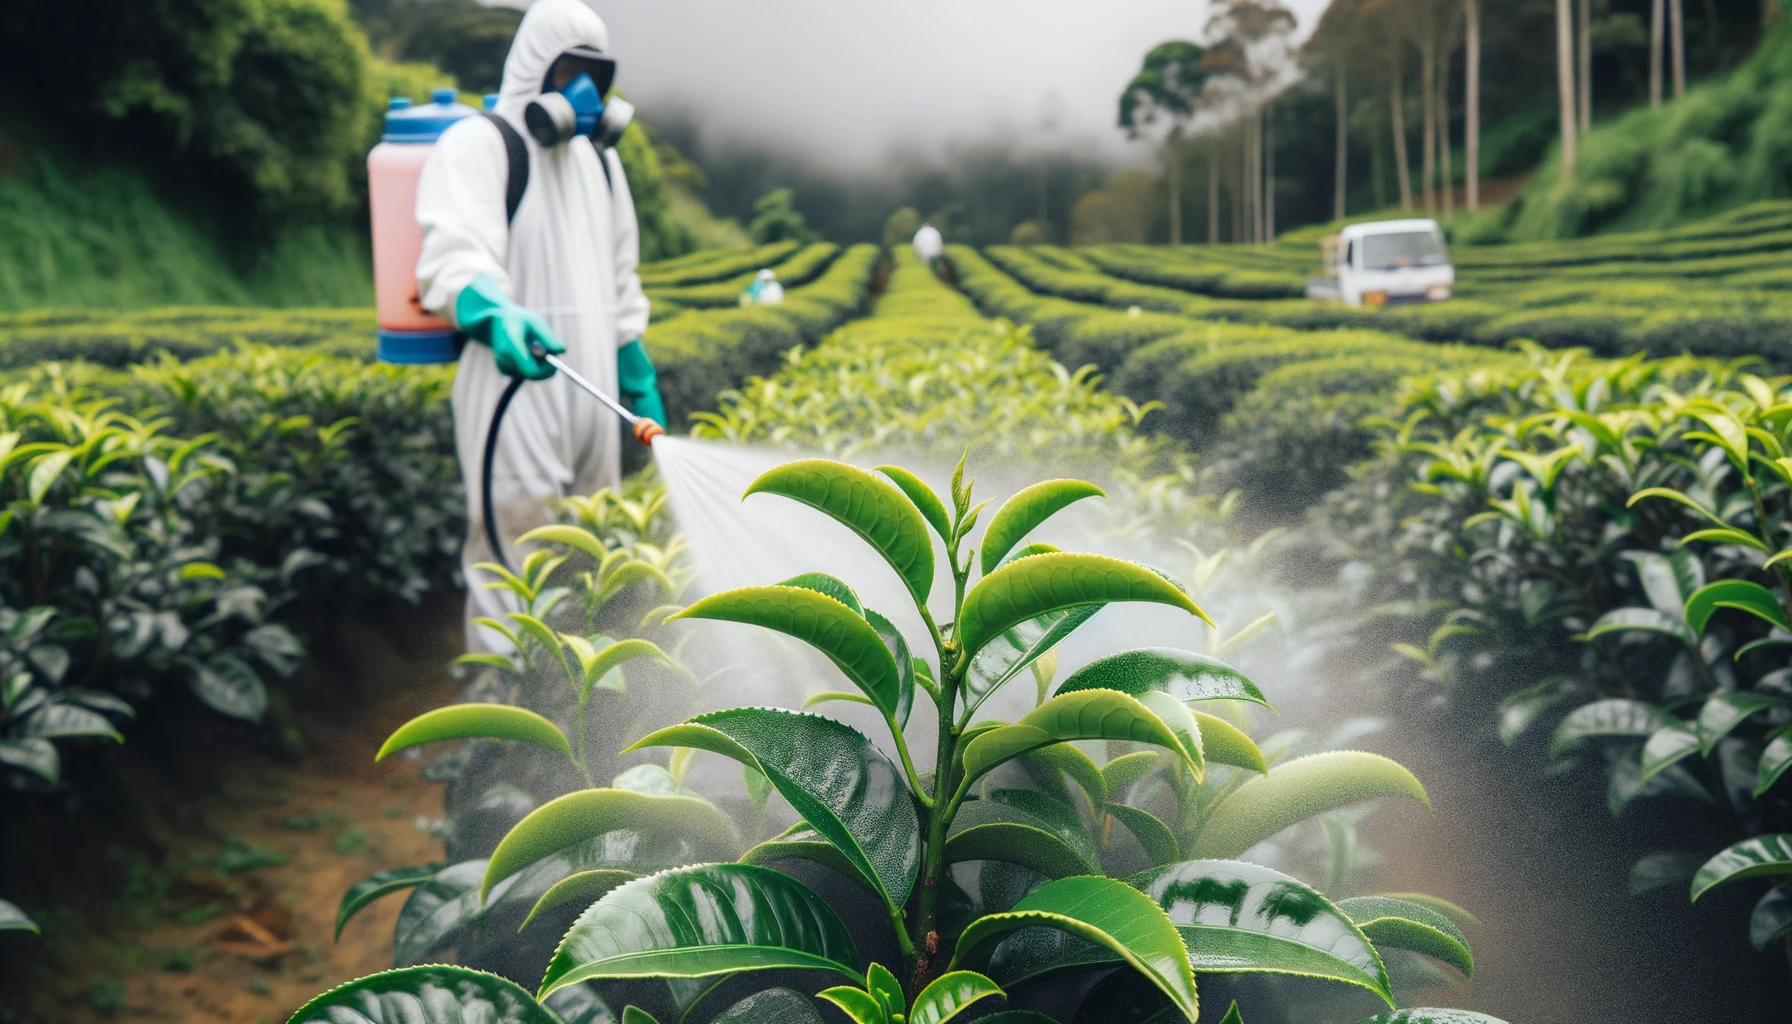 Worker in protective gear spraying chemicals on camellia sinensis plants, signifying non-organic farming.